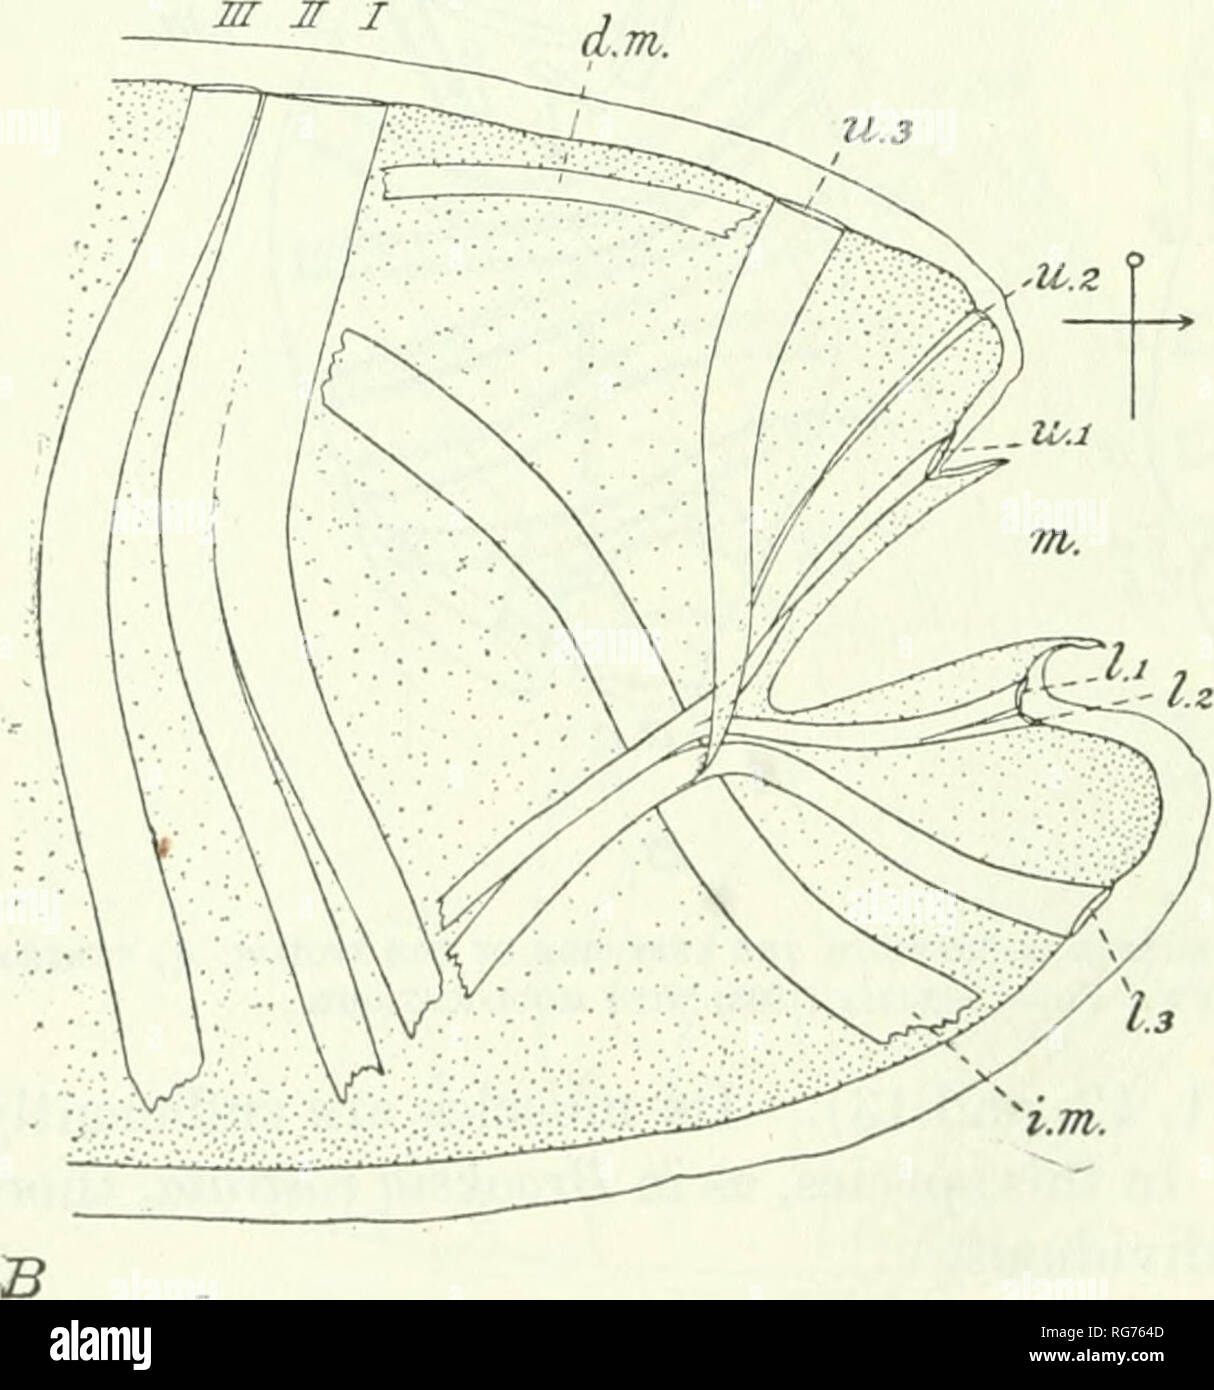 . Bulletin - United States National Museum. Science. Cyclosalpa affinis (pi. 3, fig. 10), C. Jloridana (pis. 4, 5, and 6), and C. baked (pis. 7, 8, 9, and 10), arising on each side of the body from the last body muscle, and running to the vis- cera. Note, however, that in these Cyclosal- pas this delicate strand arises from the ante- rior branch of the last body muscle while in Apsteinia punctata it arises from the poste- rior branch of this mus- cle. All the body mus- cles are interrupted ventrally. The inter- mediate muscle is pres- ent on each side as a broad band, much longer on one side t Stock Photo